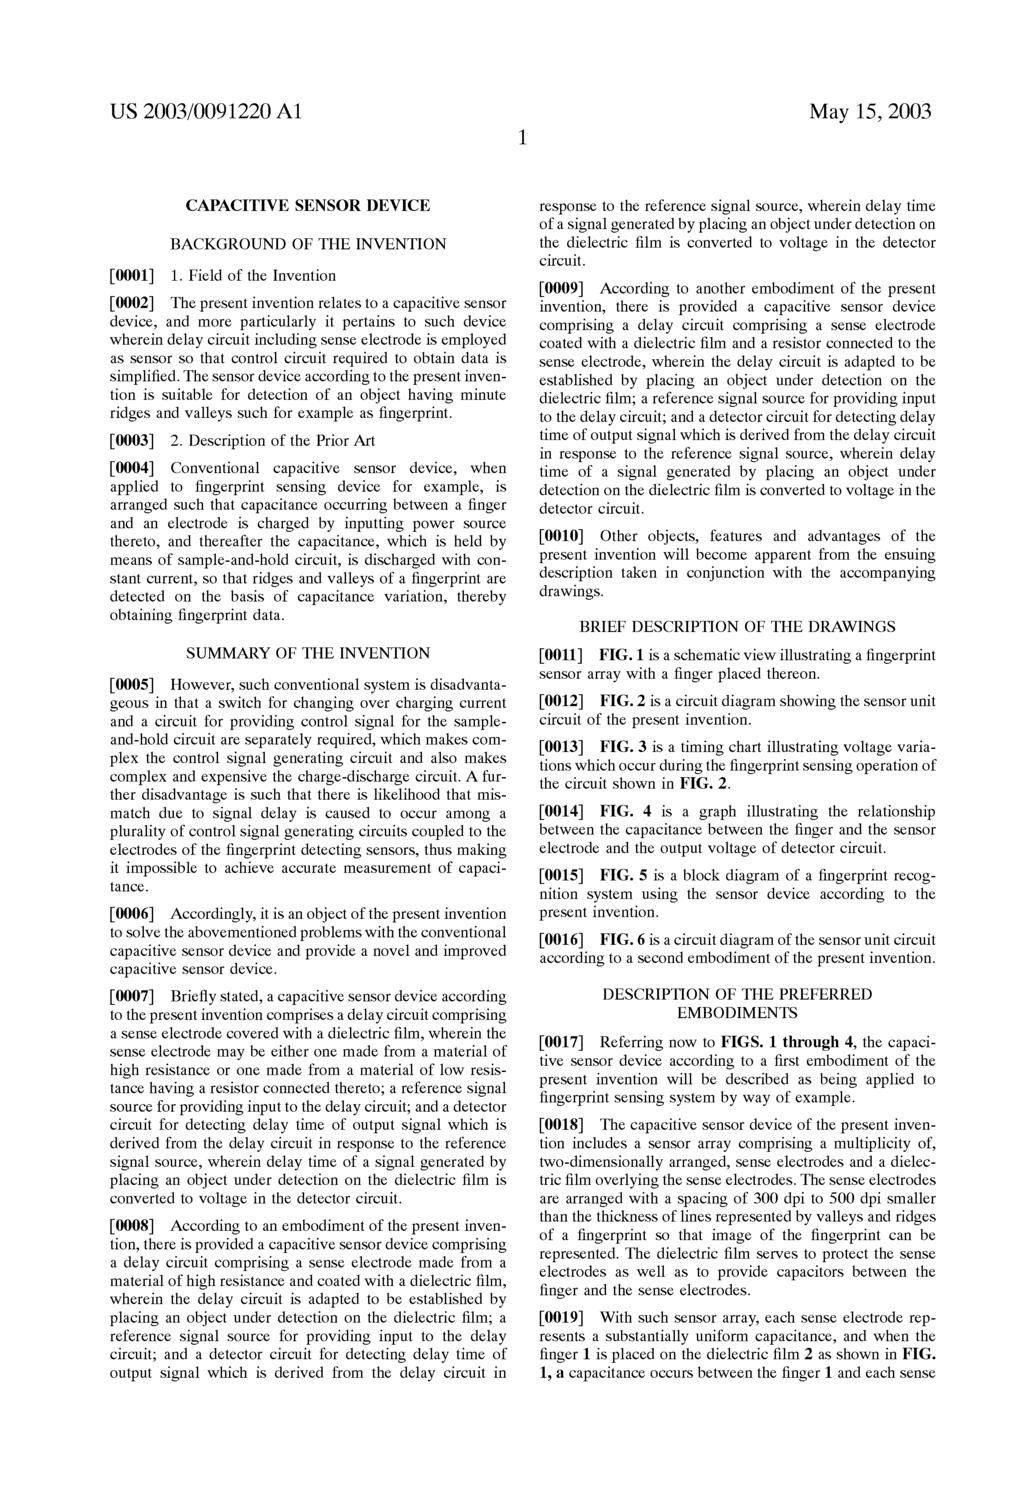 US 2003/0091220 A1 May 15, 2003 CAPACTIVE SENSOR DEVICE BACKGROUND OF THE INVENTION 0001) 1.